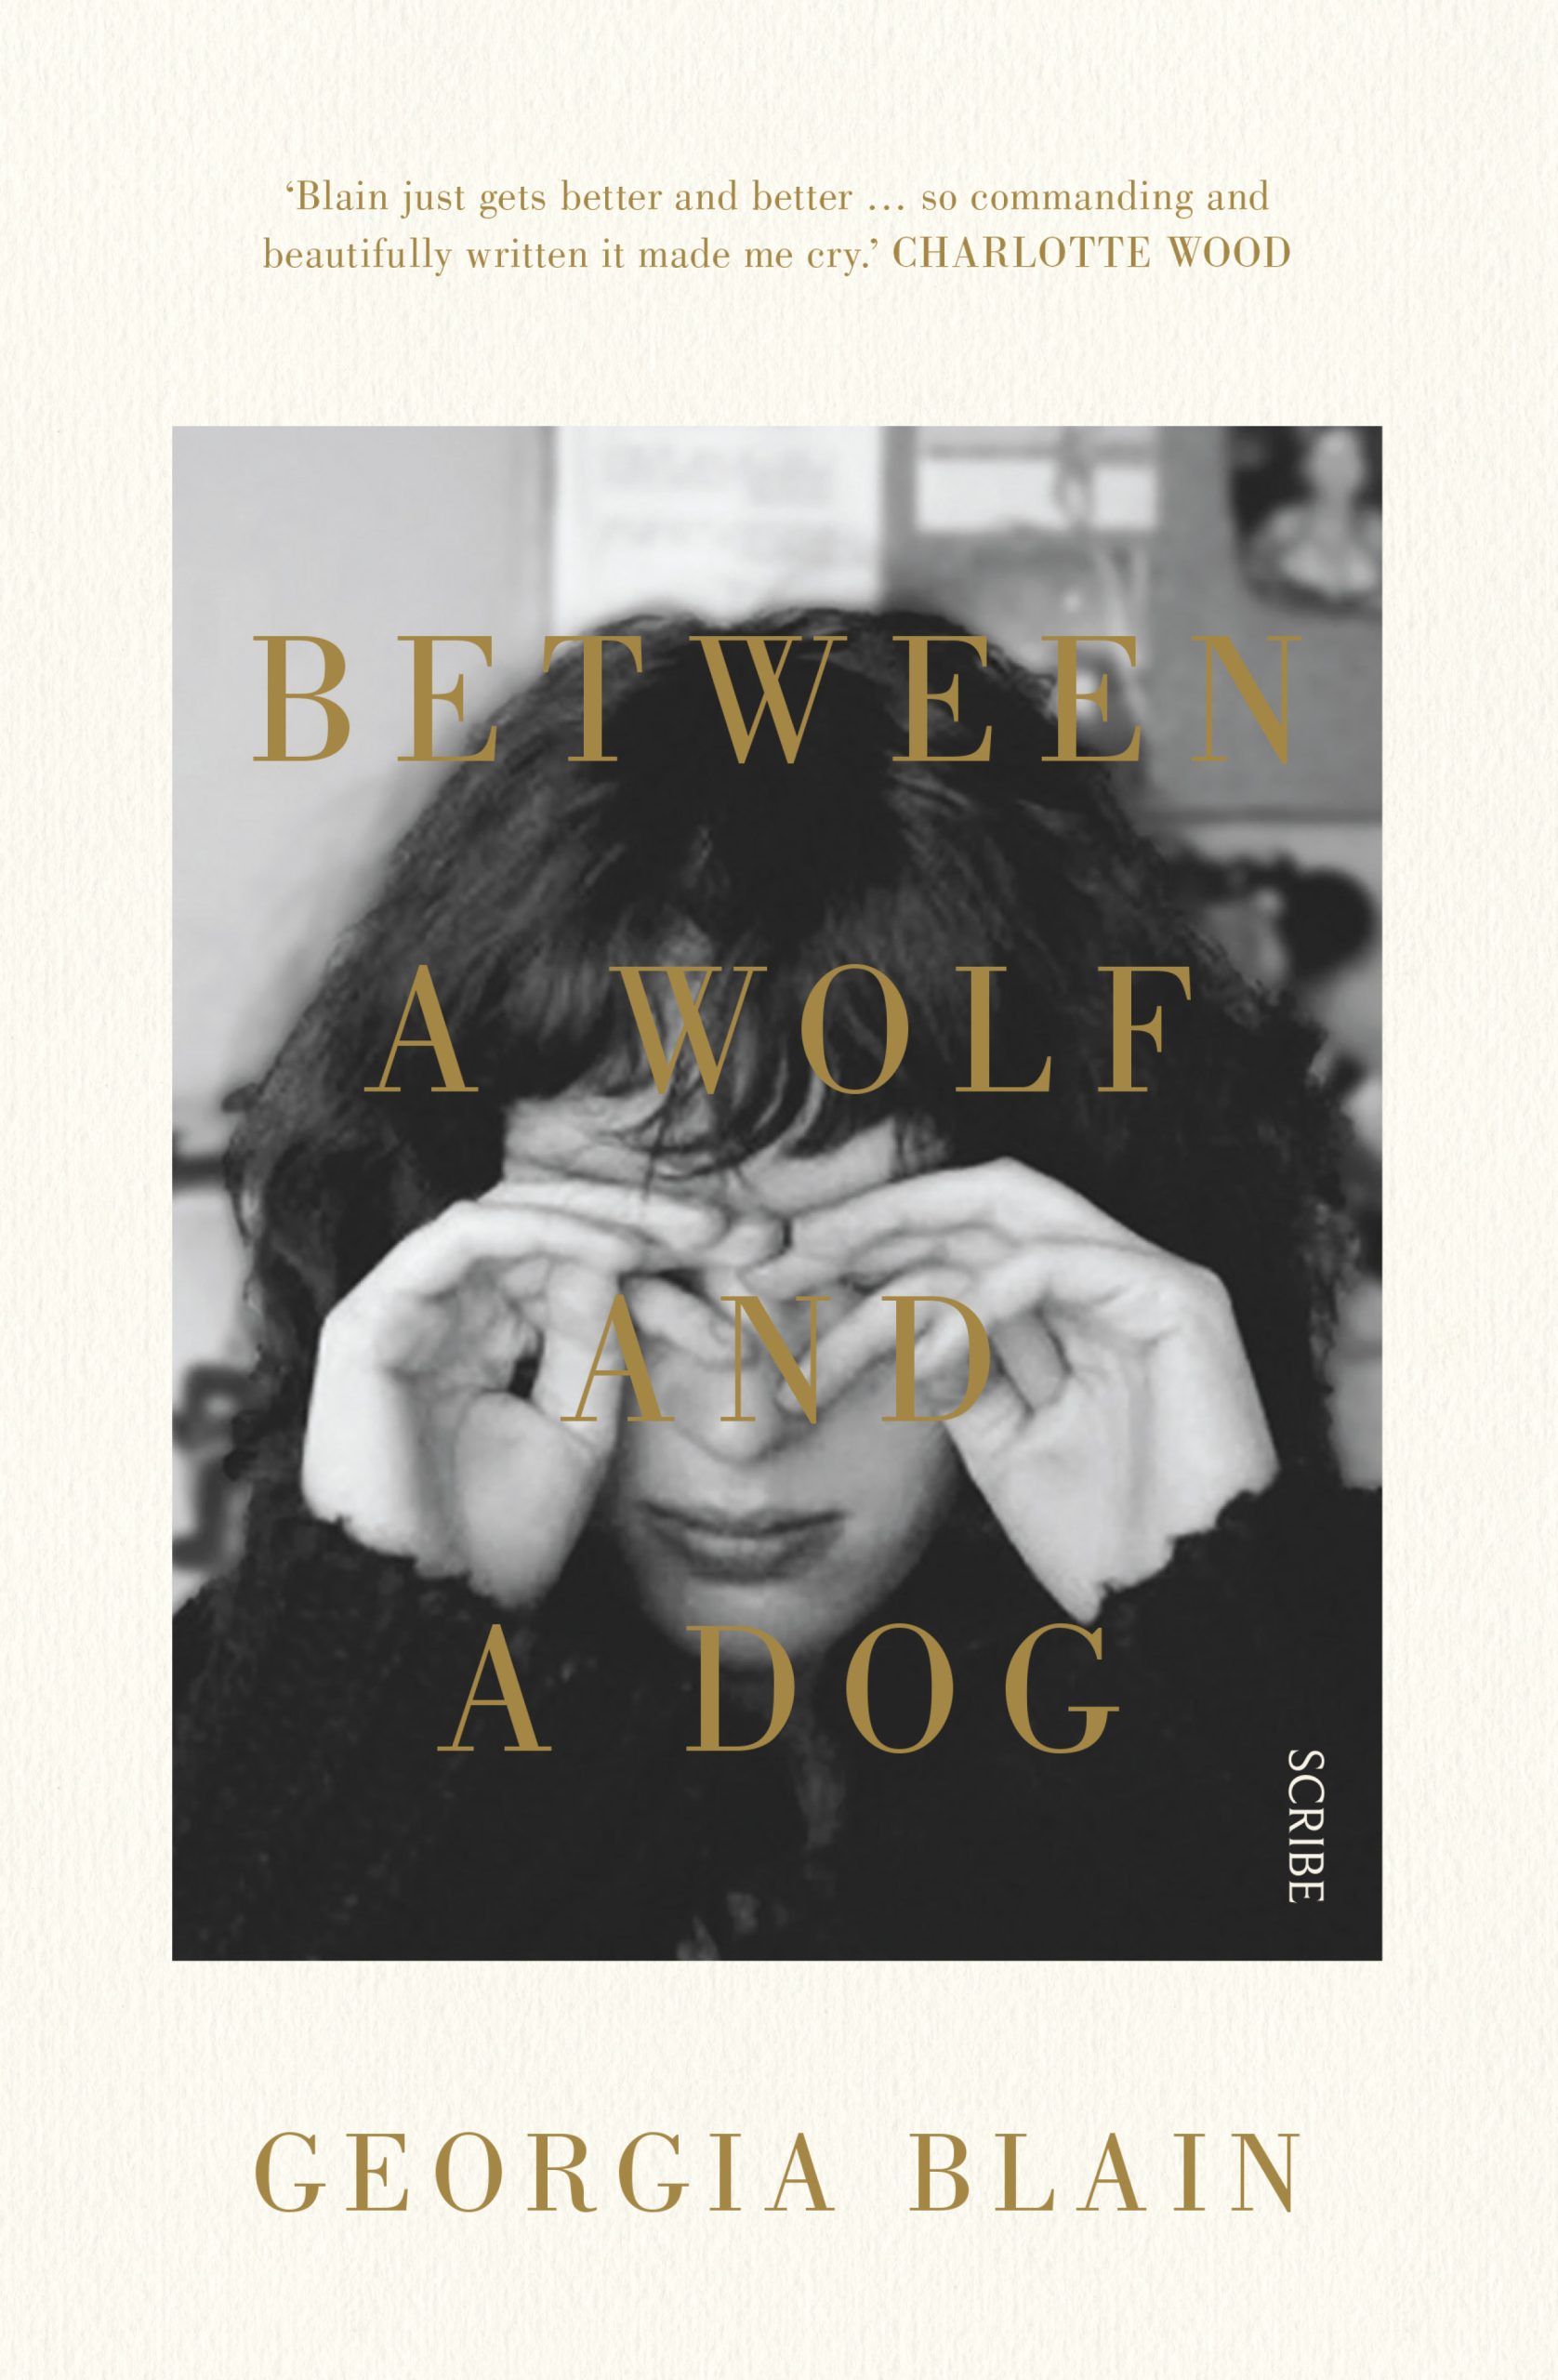 Between a wolf and a dog